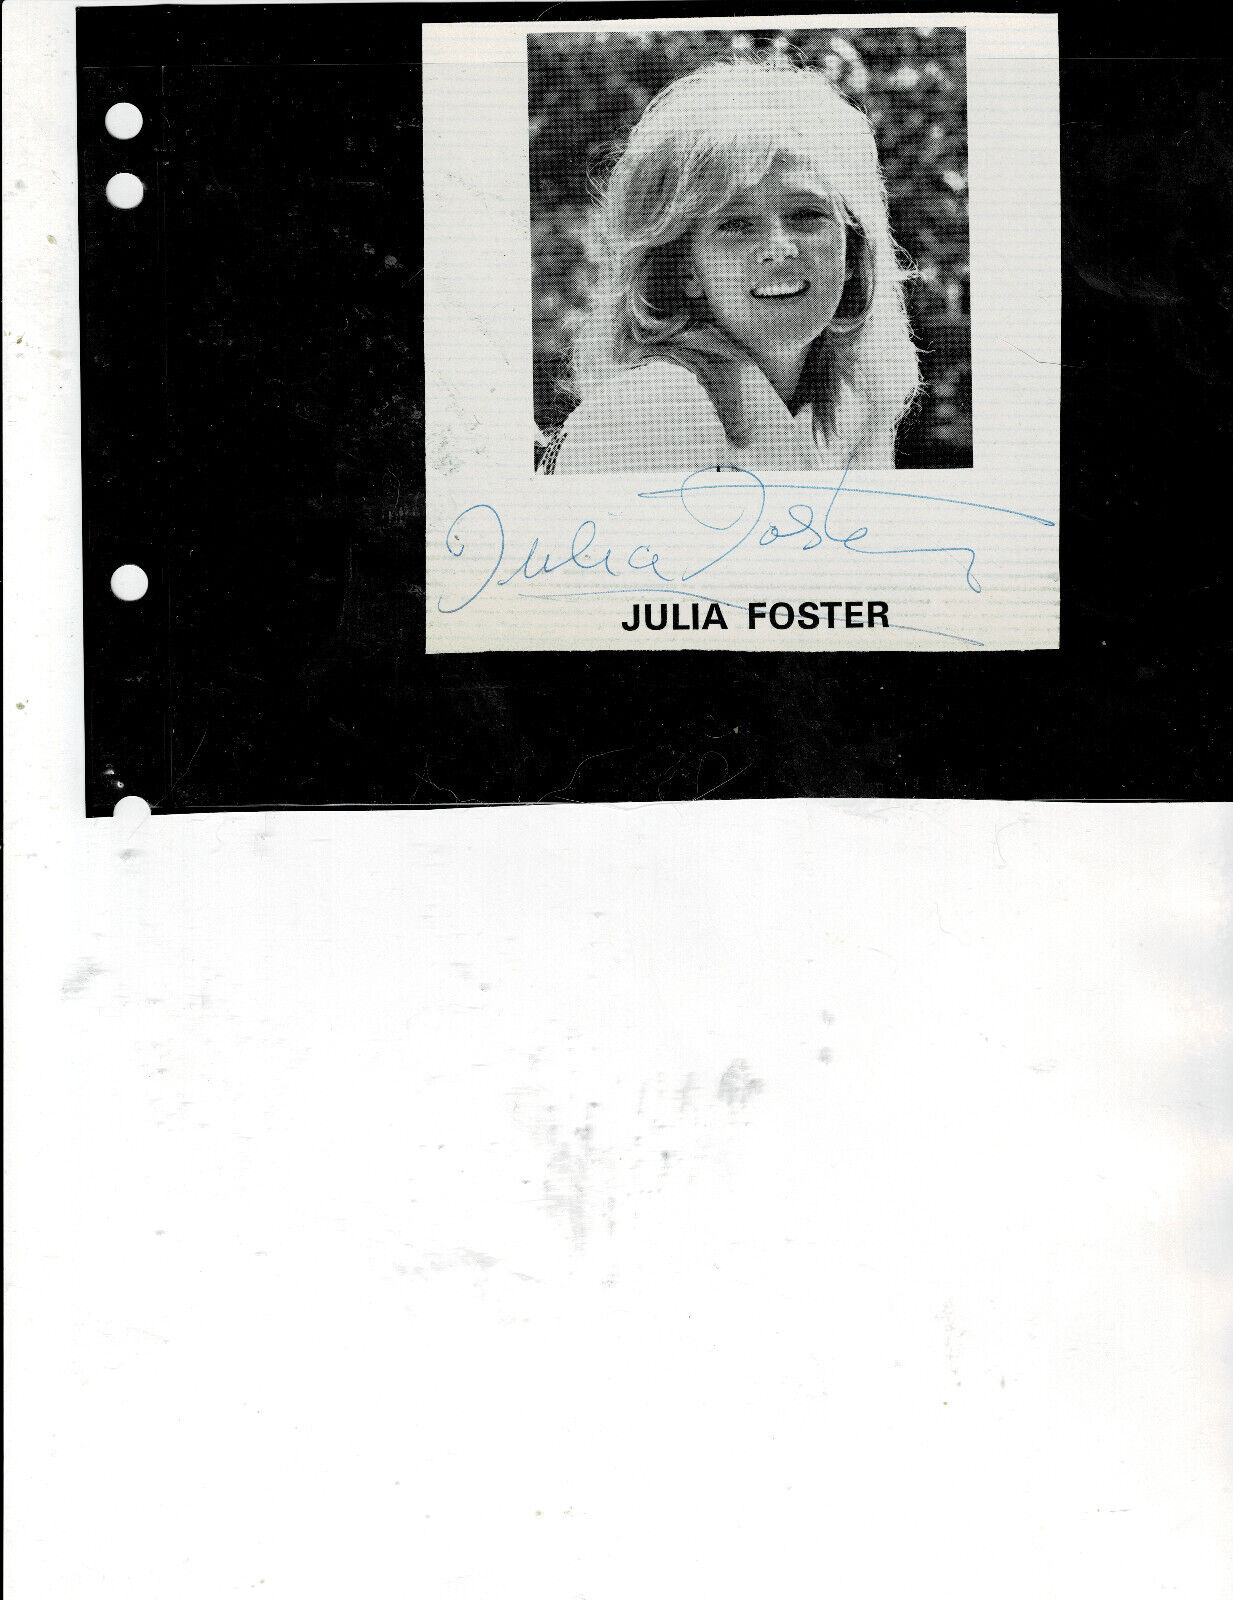 Doctor Who Series British Actress Julia Foster Autograph